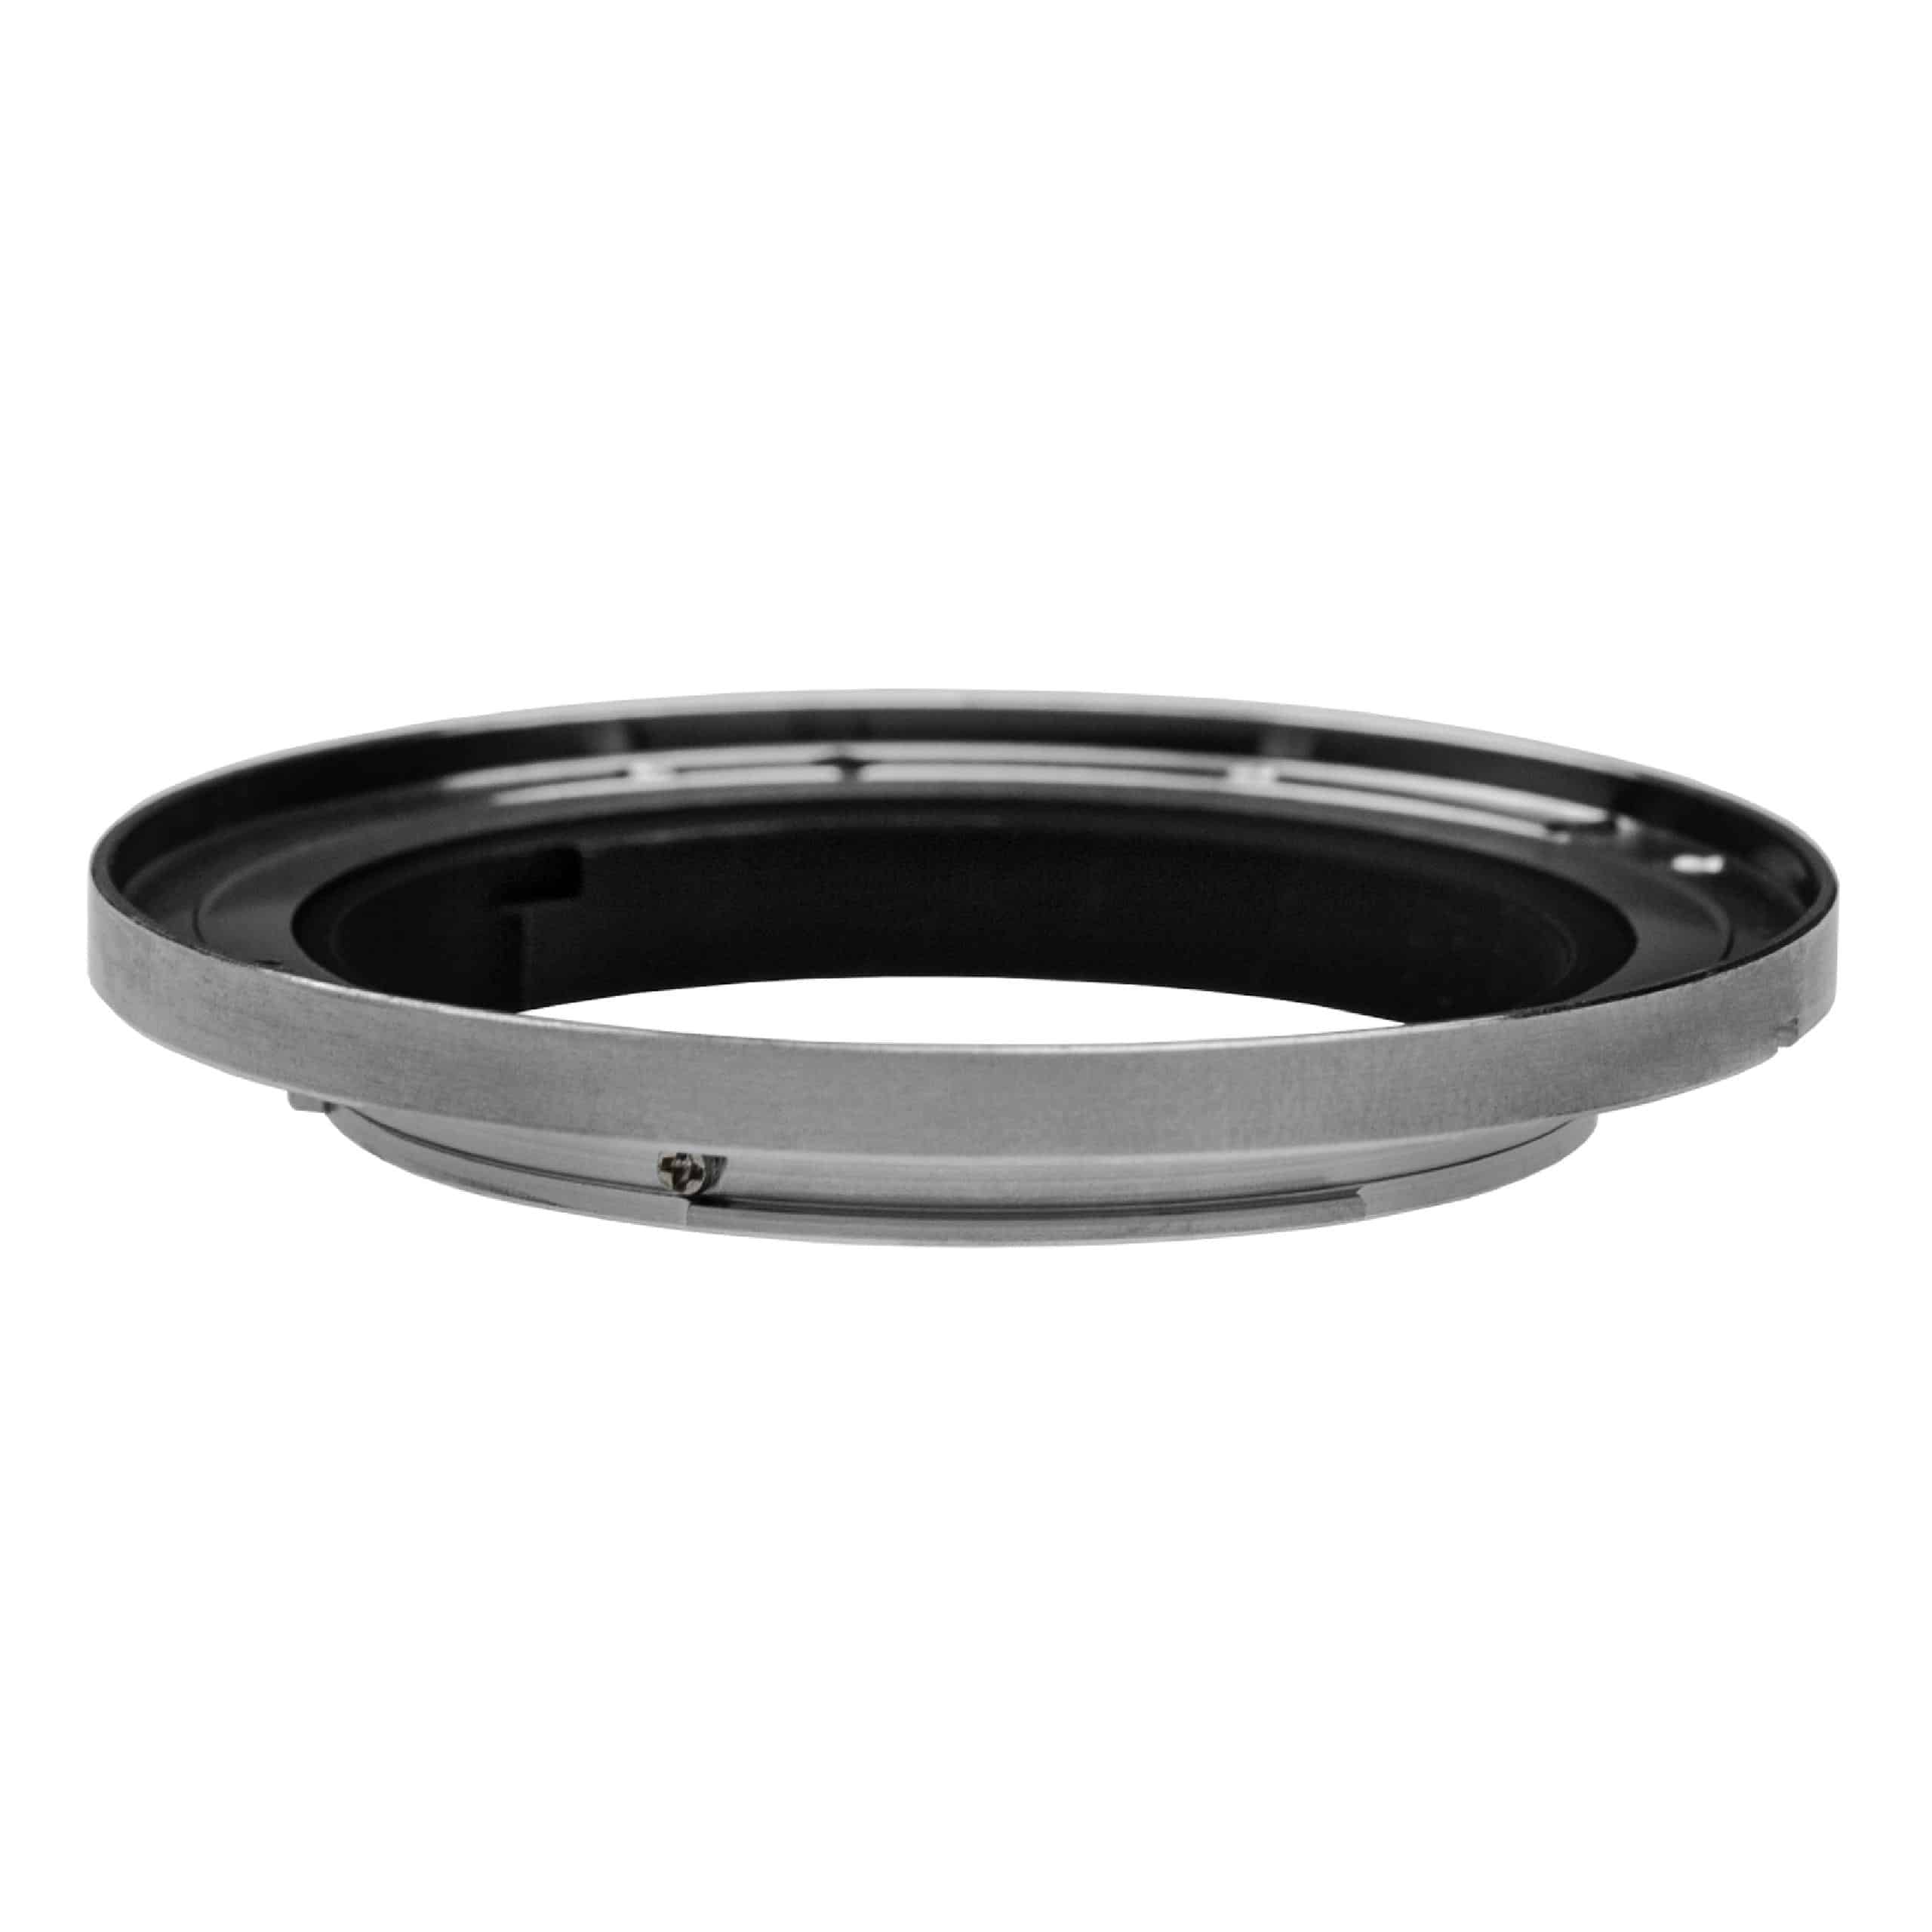 vhbw Adapter Ring compatible with - AI Camera, compatible with Leica R Lenses Silver